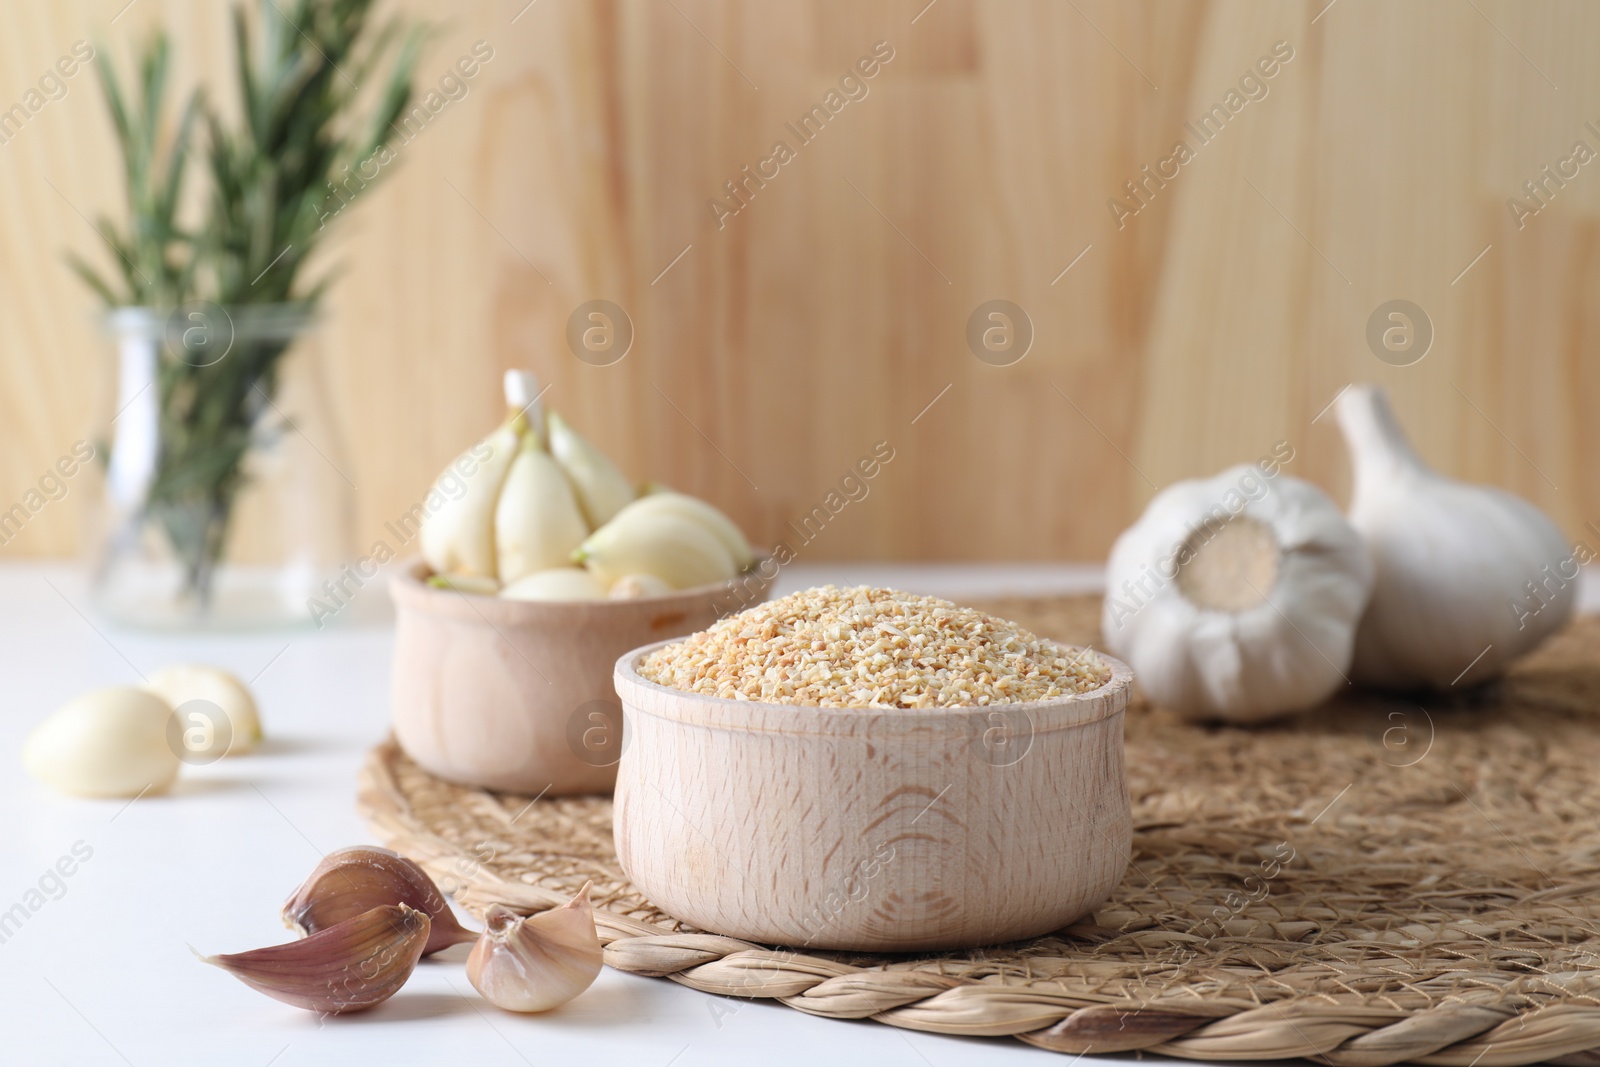 Photo of Dehydrated garlic granules in bowl, fresh bulbs and cloves on white table